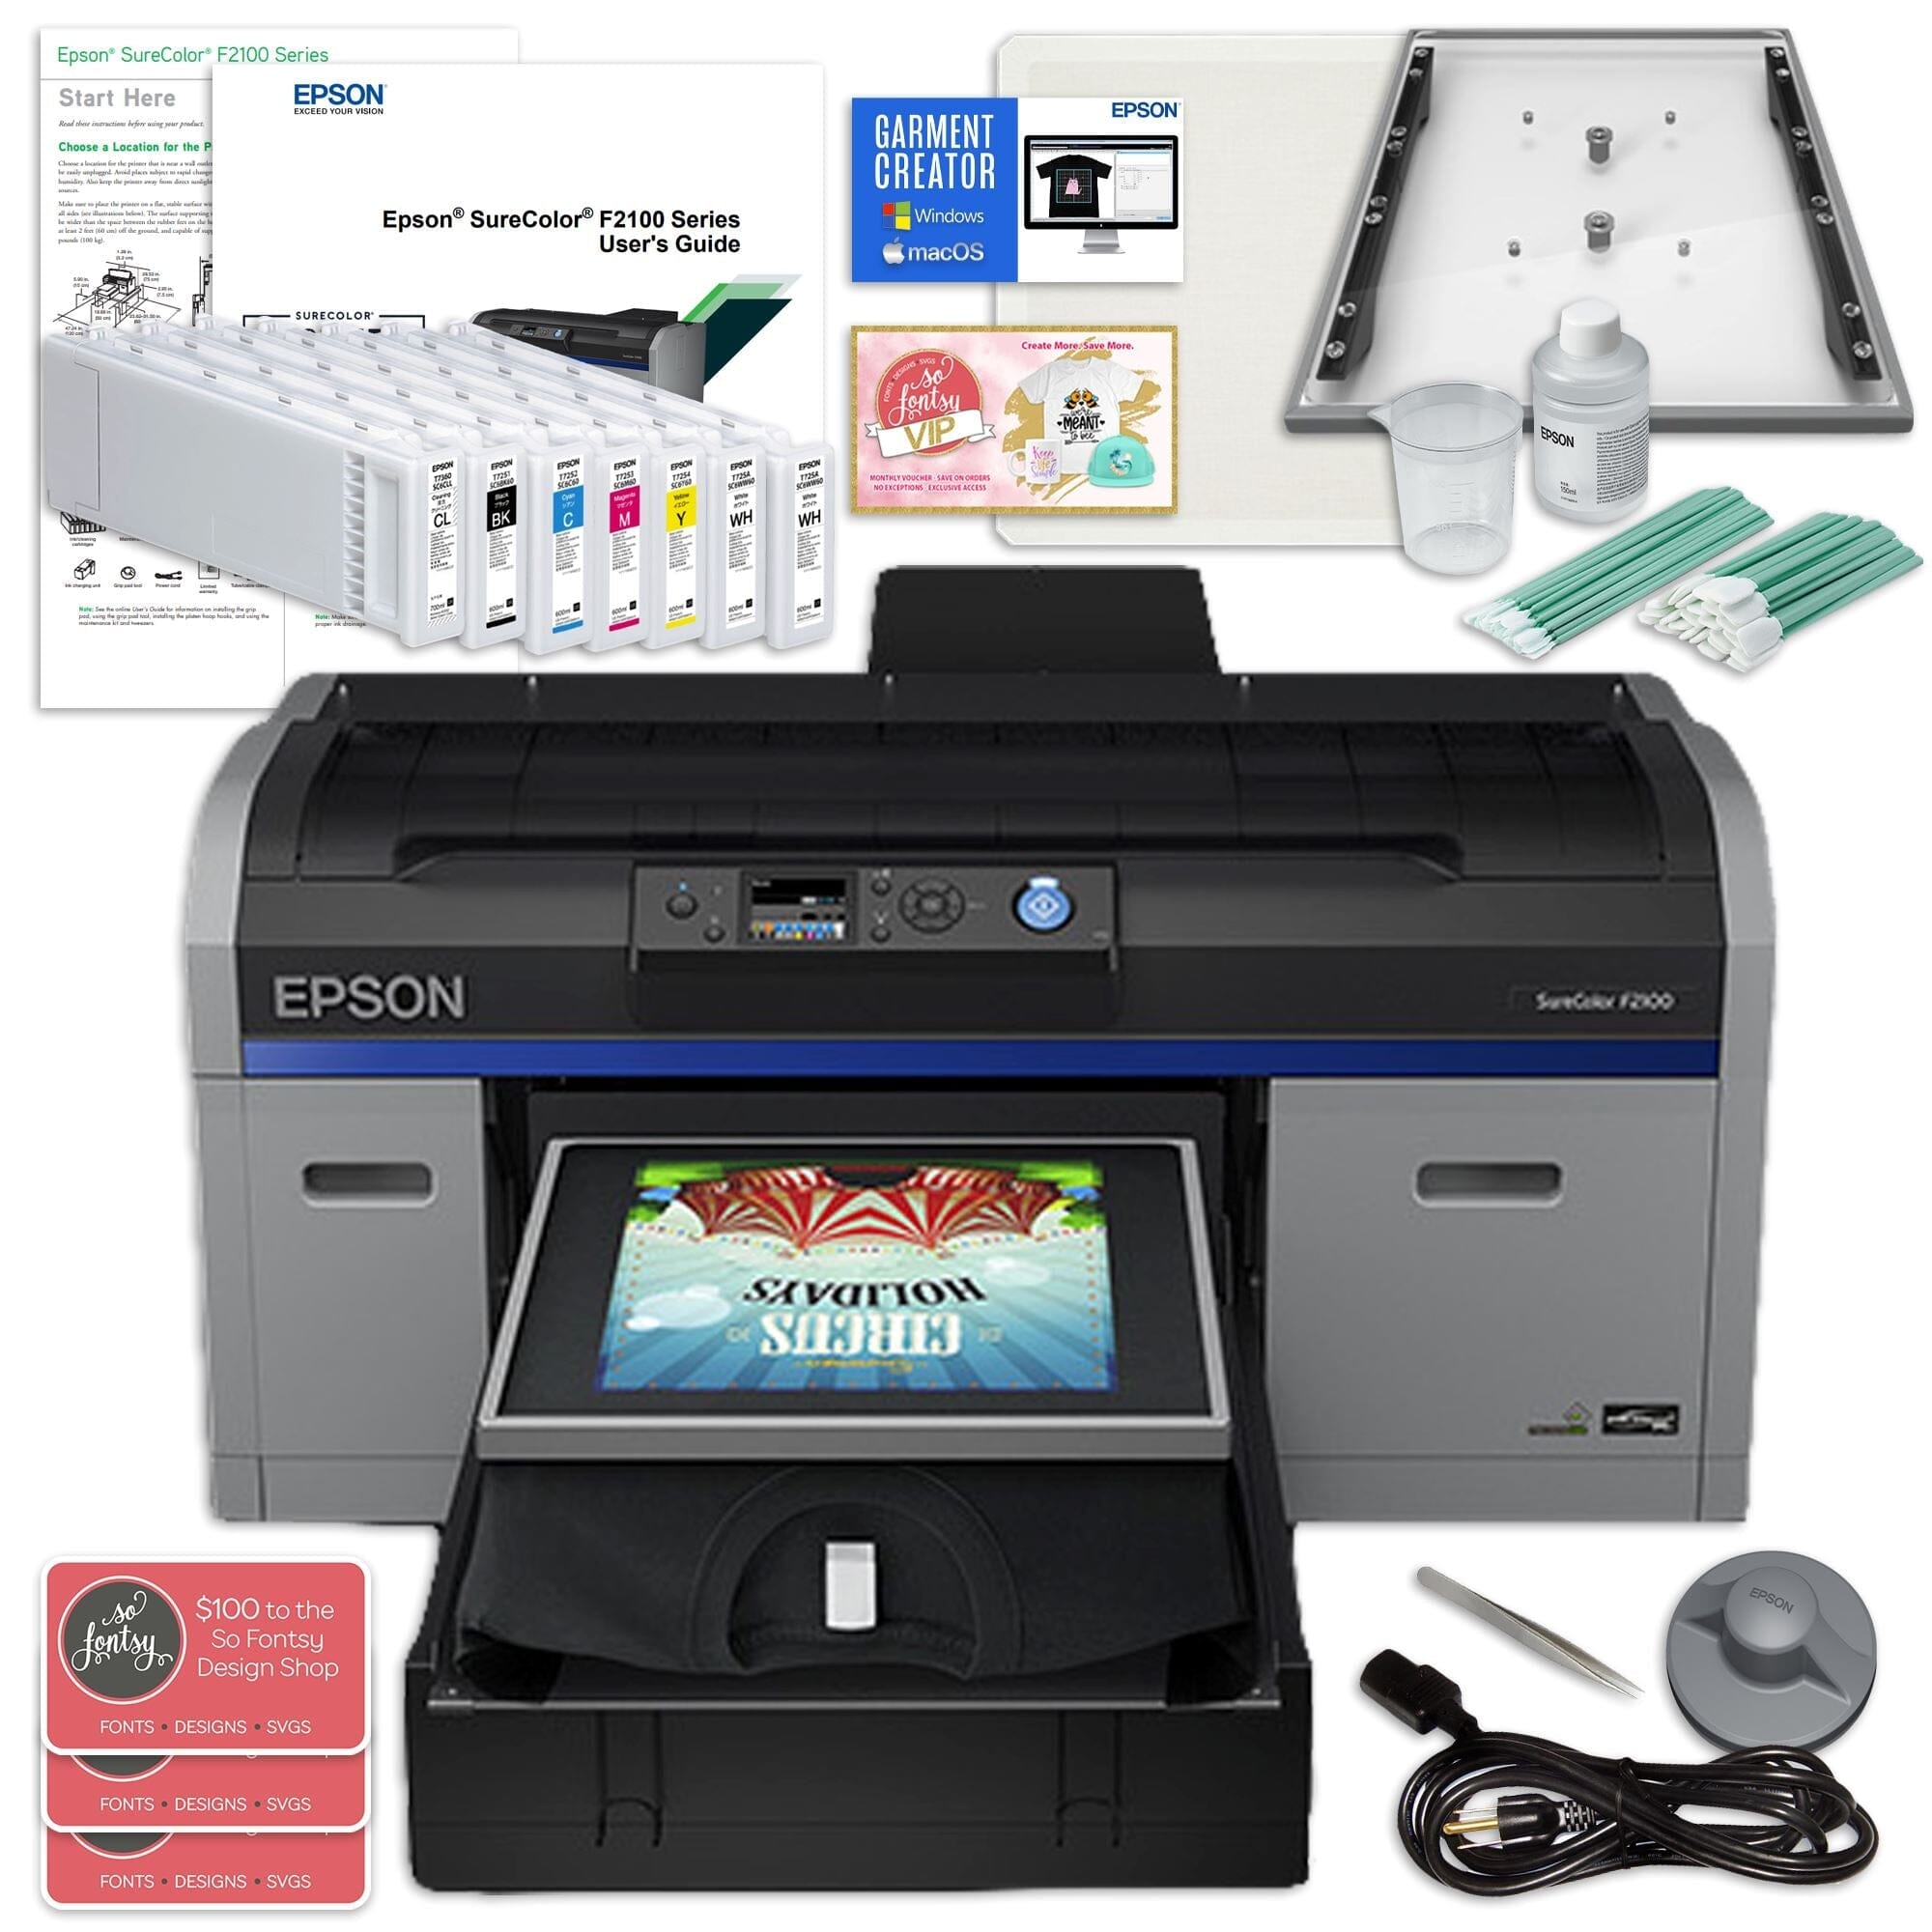 How To Print DTF On The Epson F2100